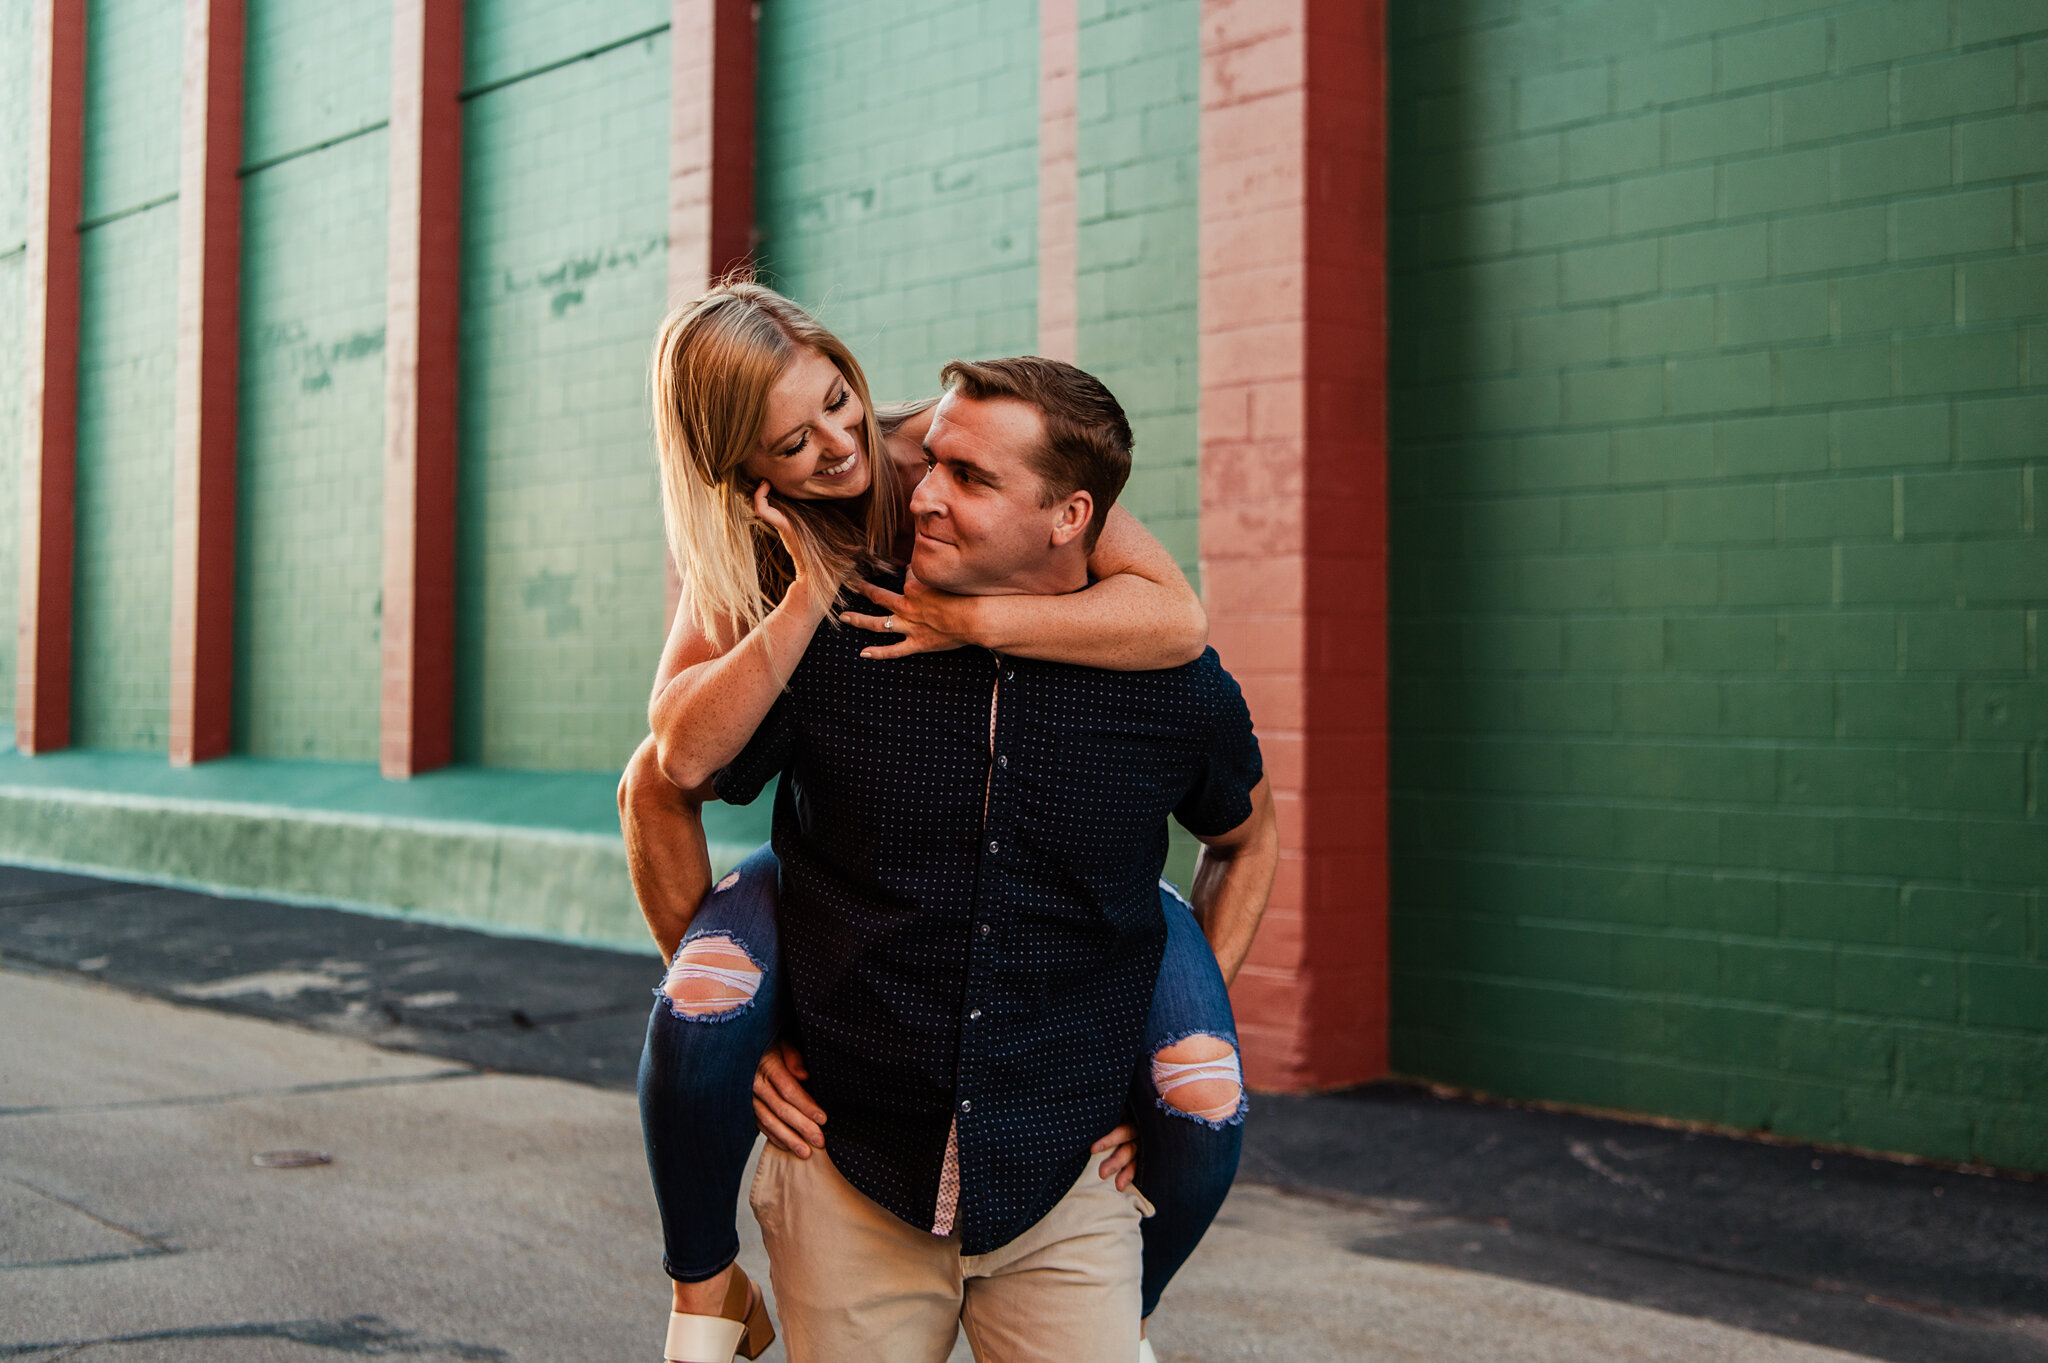 Genesee_Brew_House_High_Falls_Rochester_Engagement_Session_JILL_STUDIO_Rochester_NY_Photographer_5679.jpg